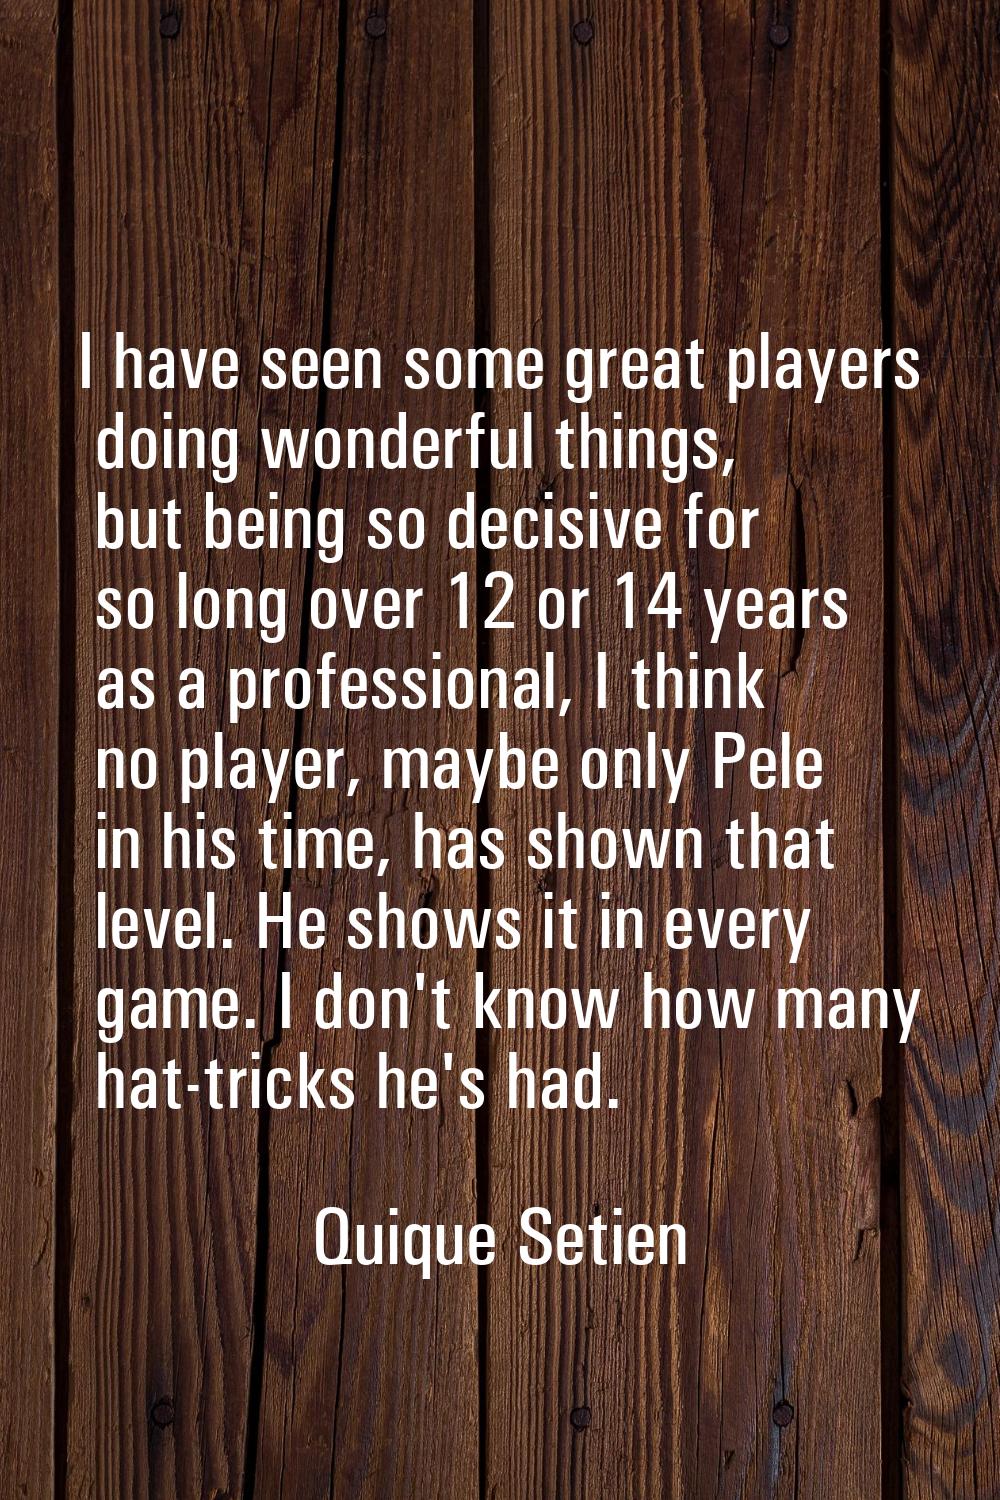 I have seen some great players doing wonderful things, but being so decisive for so long over 12 or